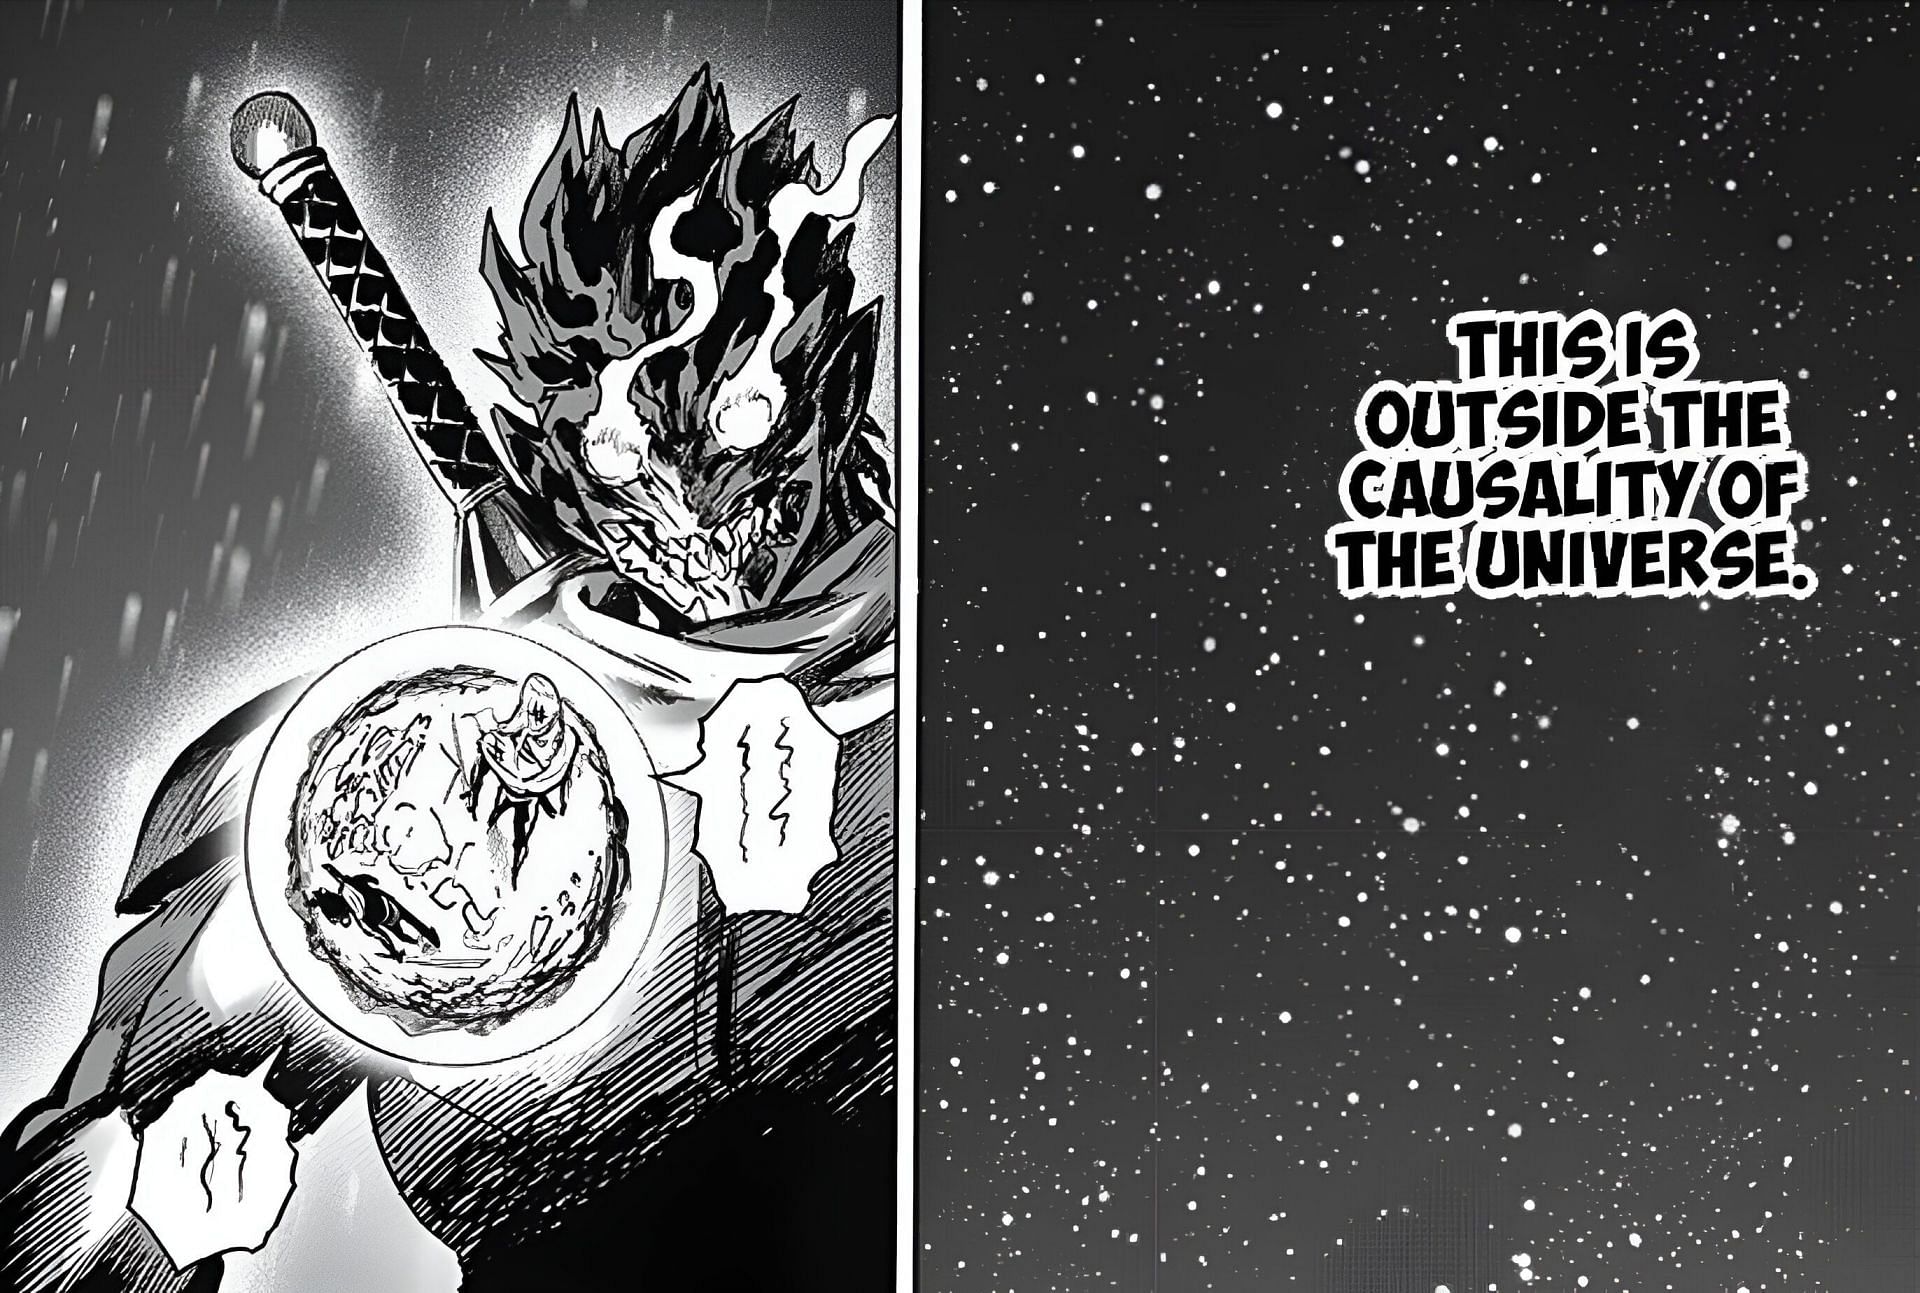 Empty Void standing outside the causality of the universe in One Punch Man Chapter 201 (Image via Shueisha)